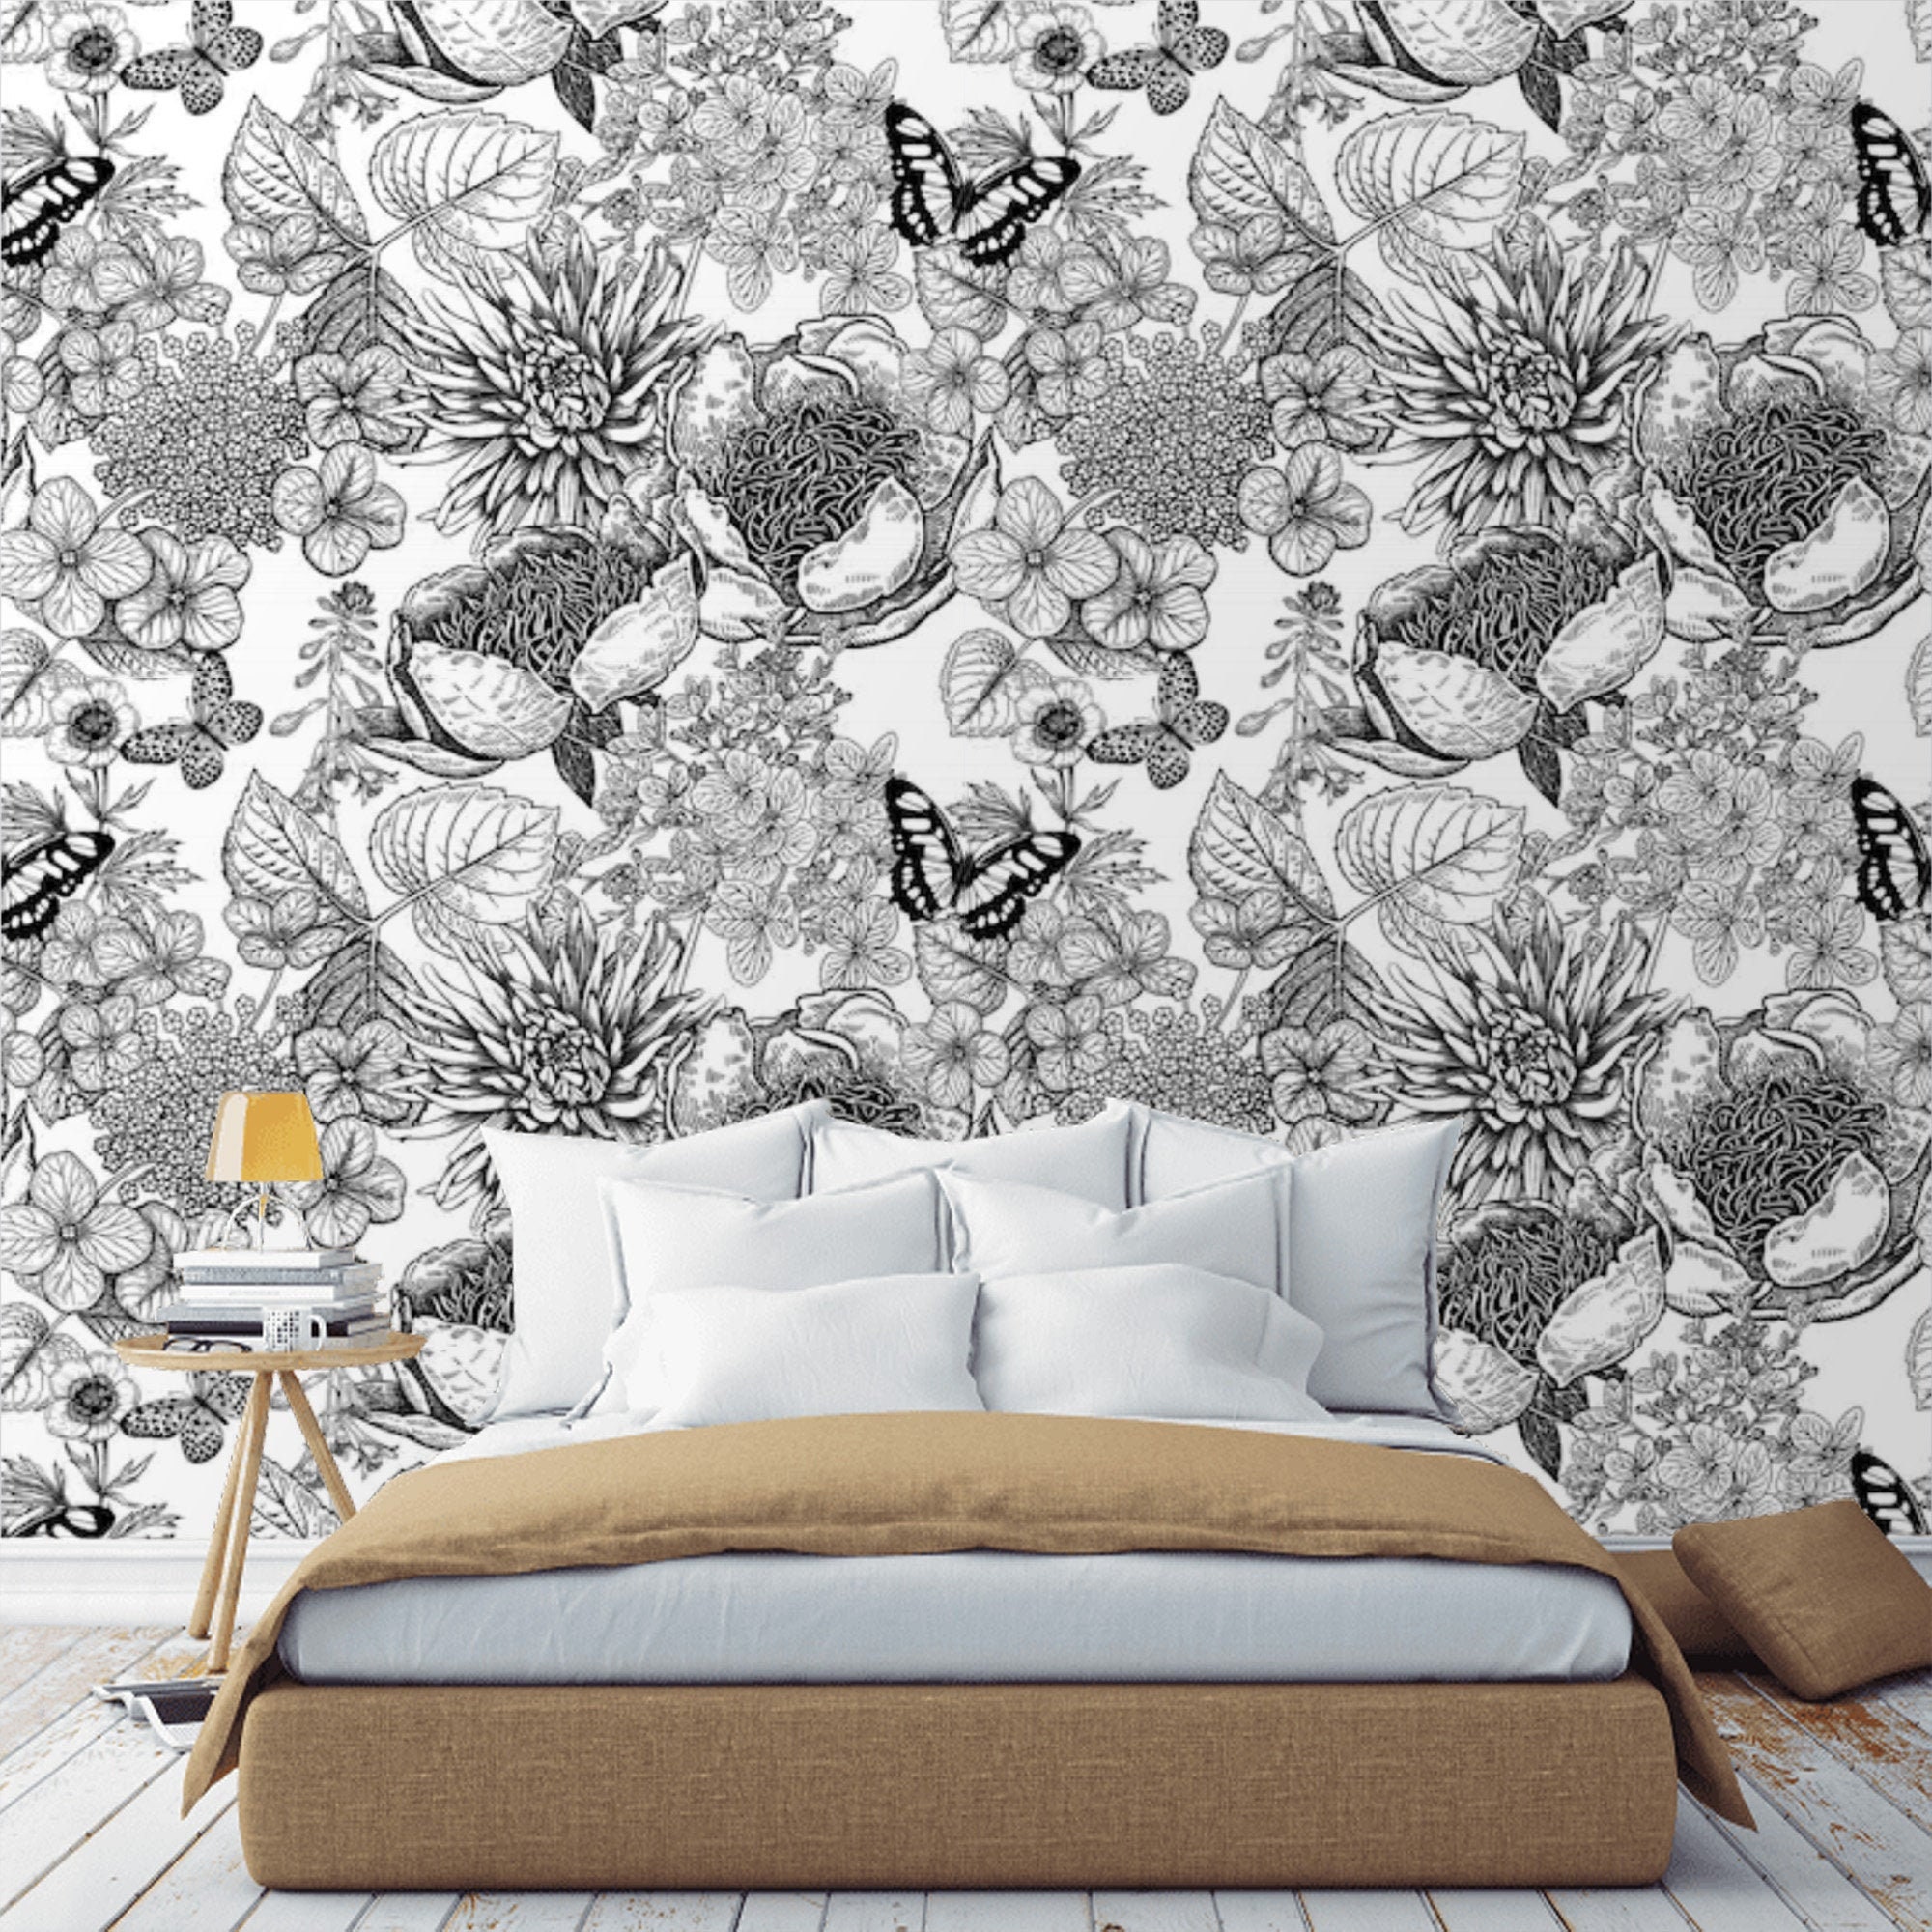 Floral Wallpaper Black and White Botanical Wall Paper | Etsy